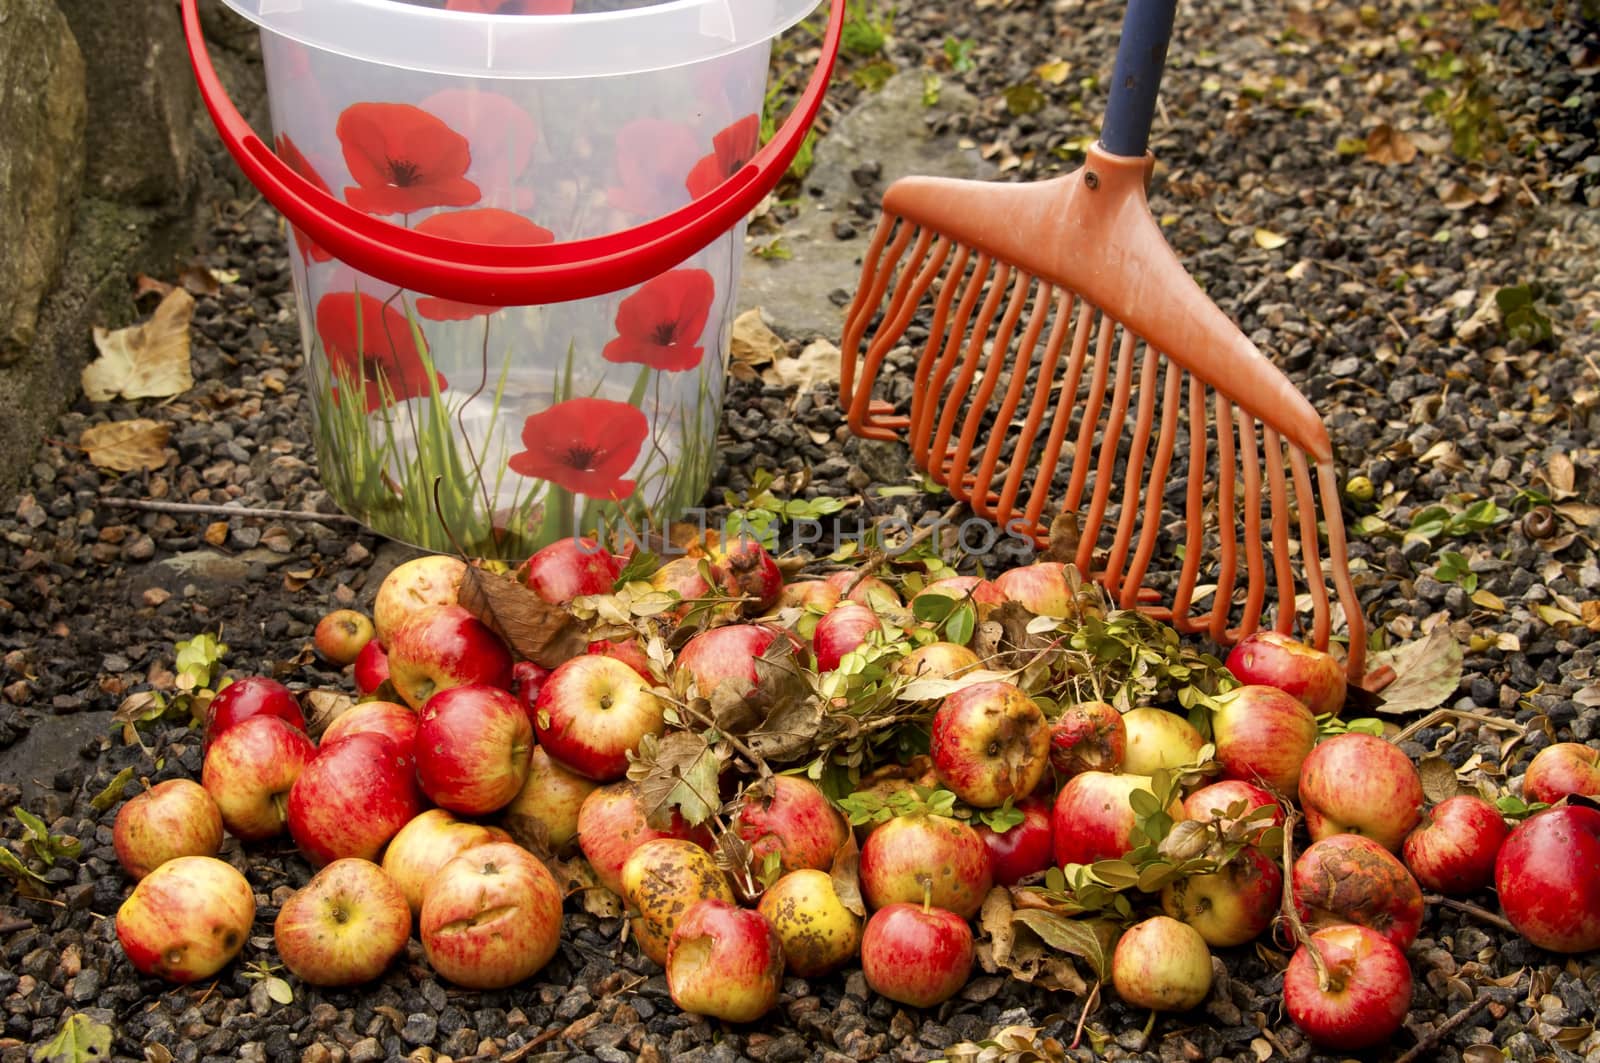 Removing windfall apples with a pail and rake